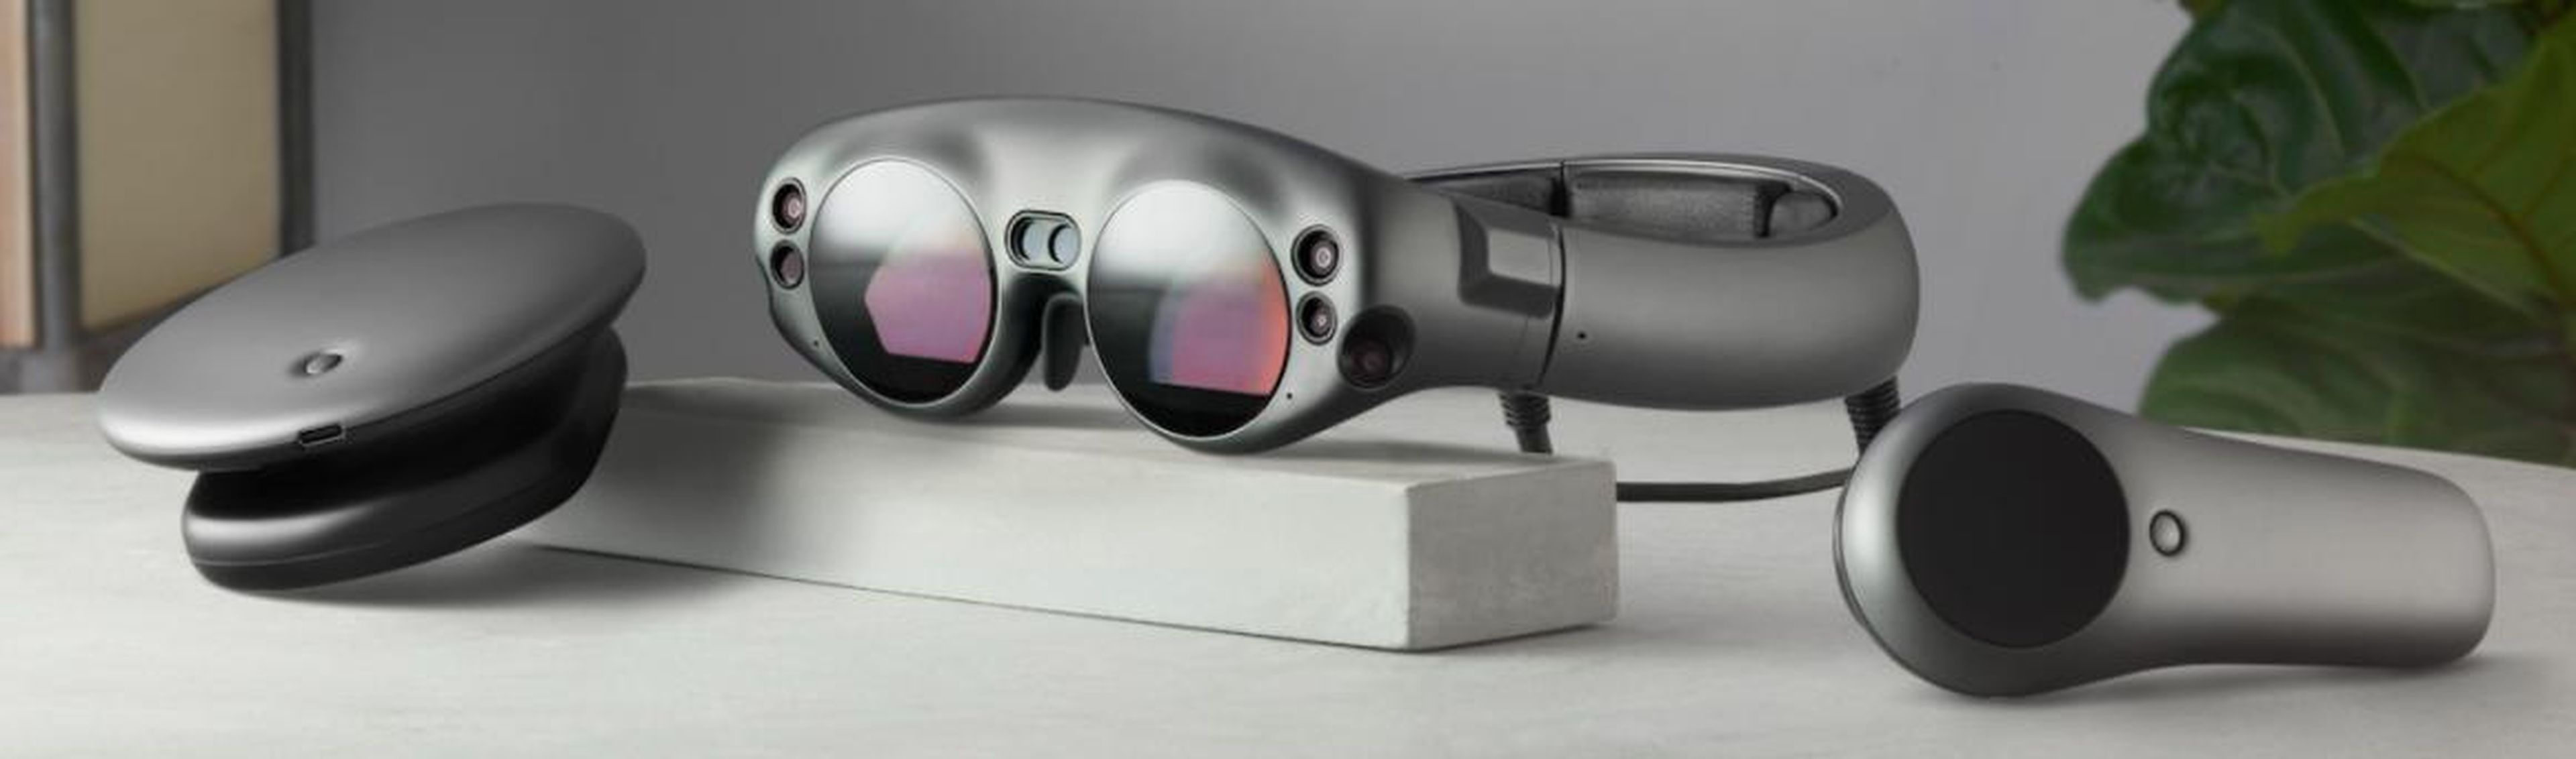 The Magic Leap One system.